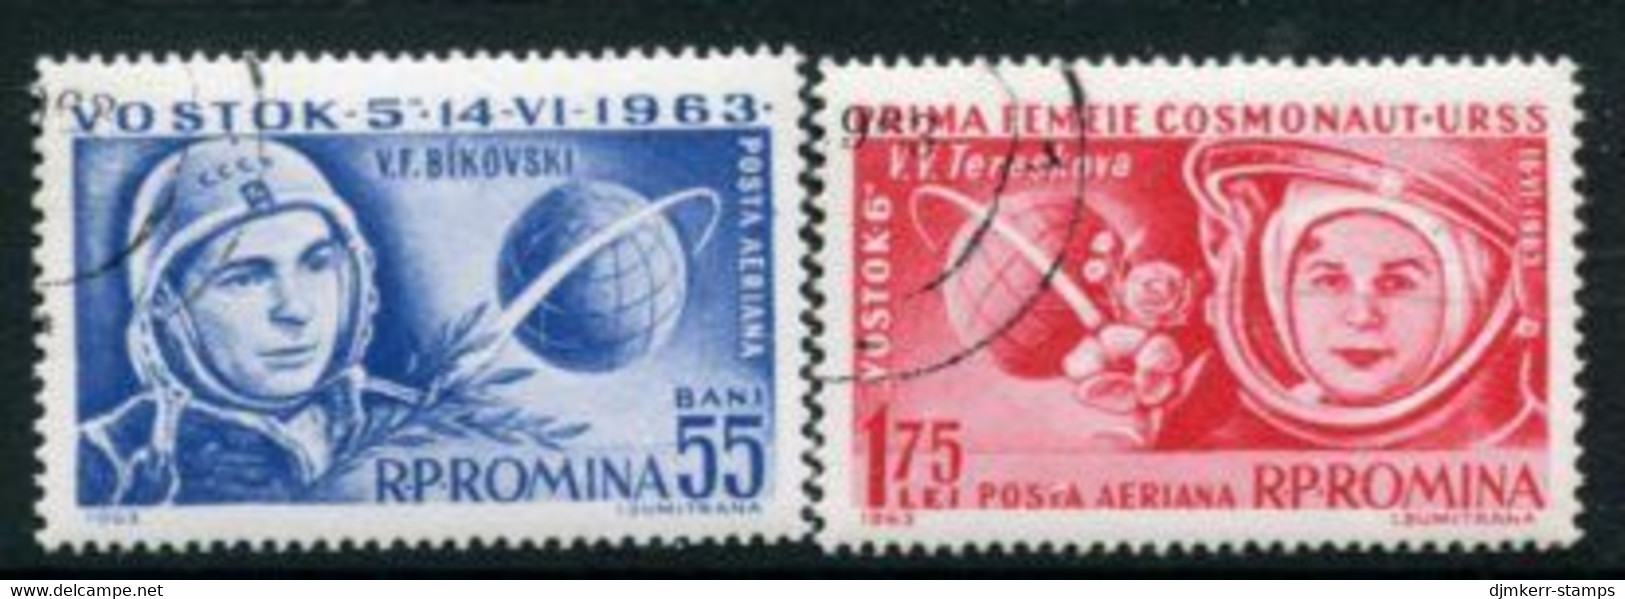 ROMANIA 1963 Vostok 5 And 6 Space Flights Used.  Michel 2171-72 - Used Stamps